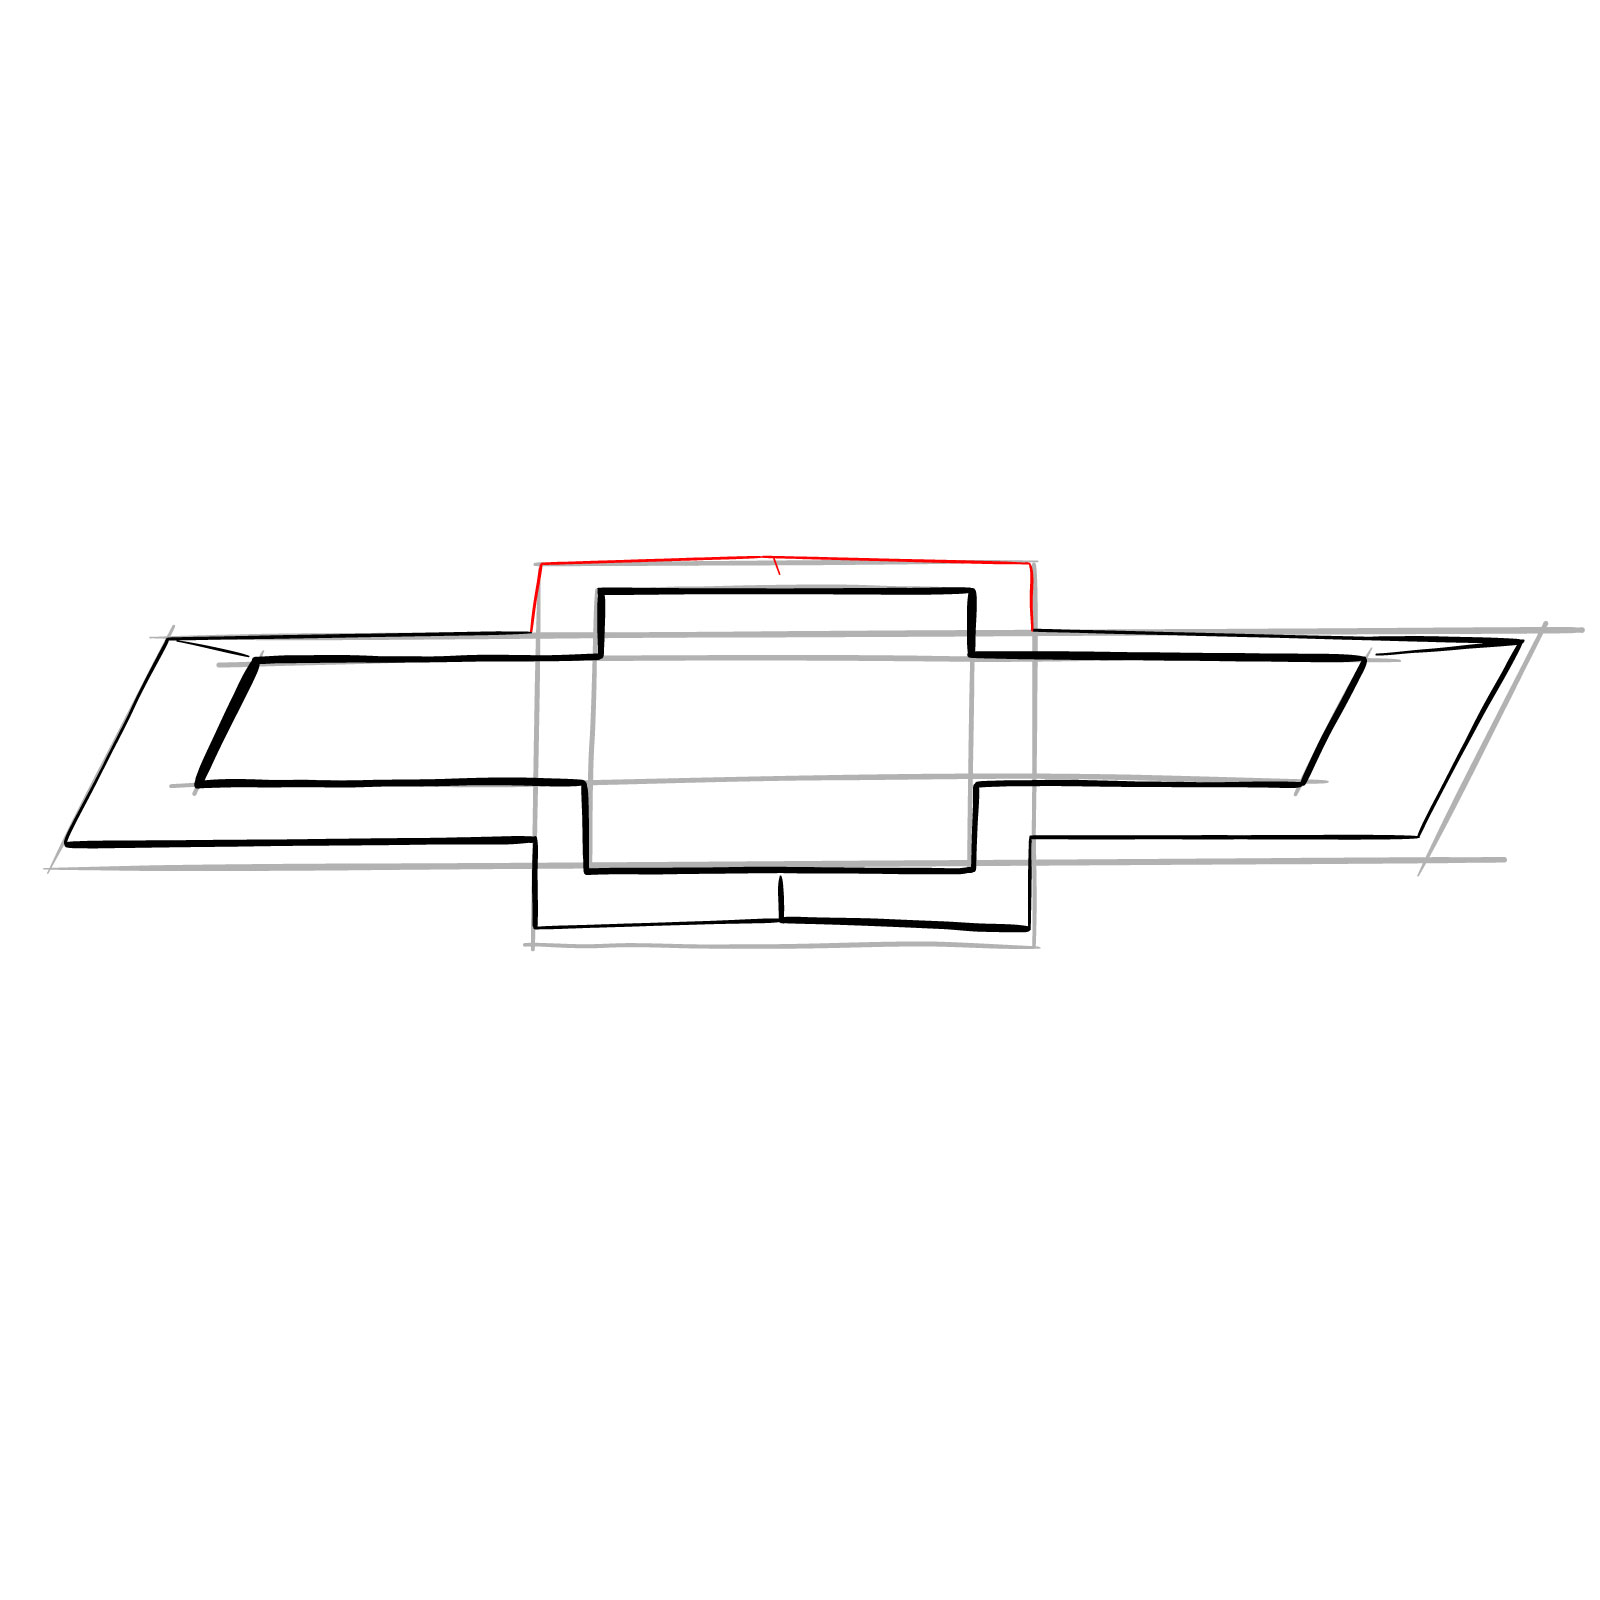 How to draw the Chevrolet logo - step 10